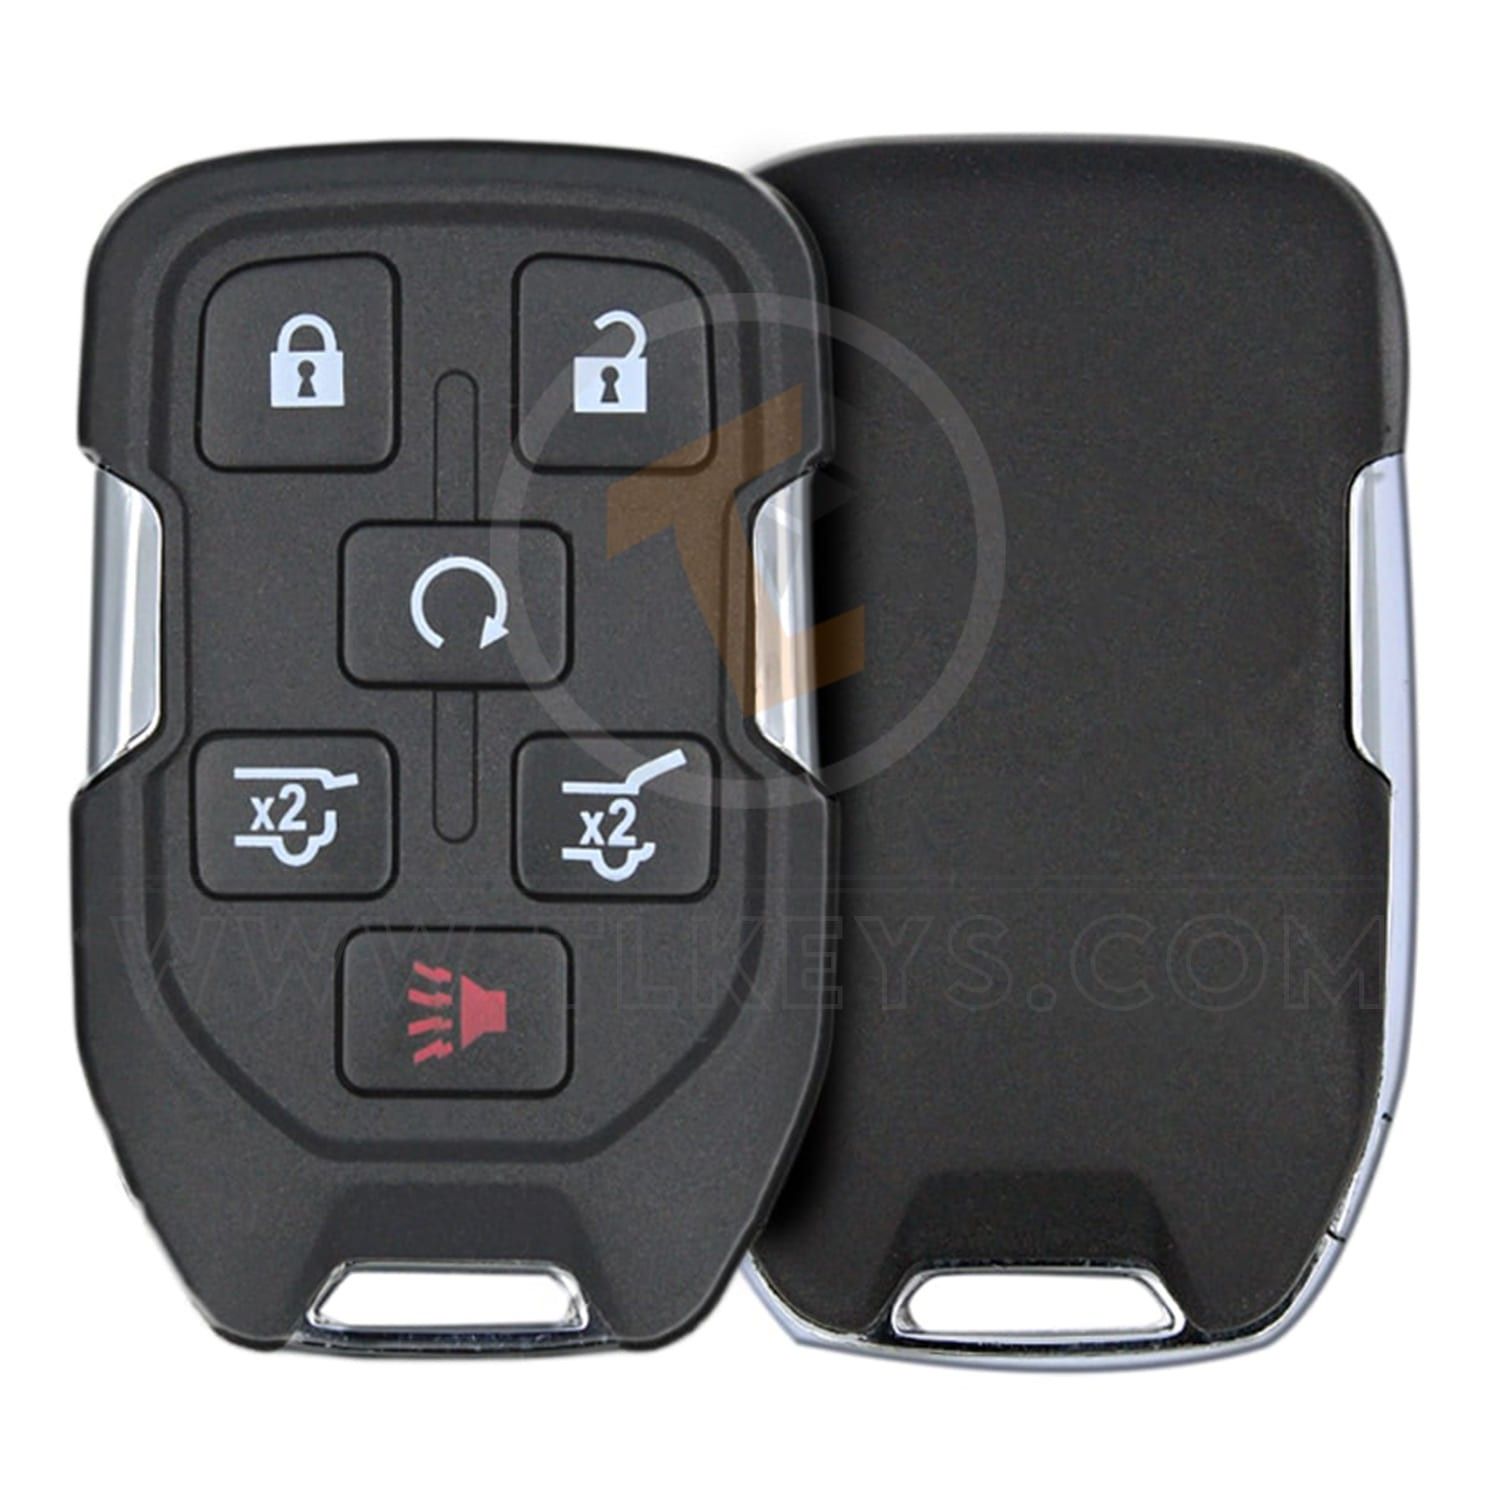  Remote Key 2008 2017 433MHz 6 Buttons Frequency 433MHz